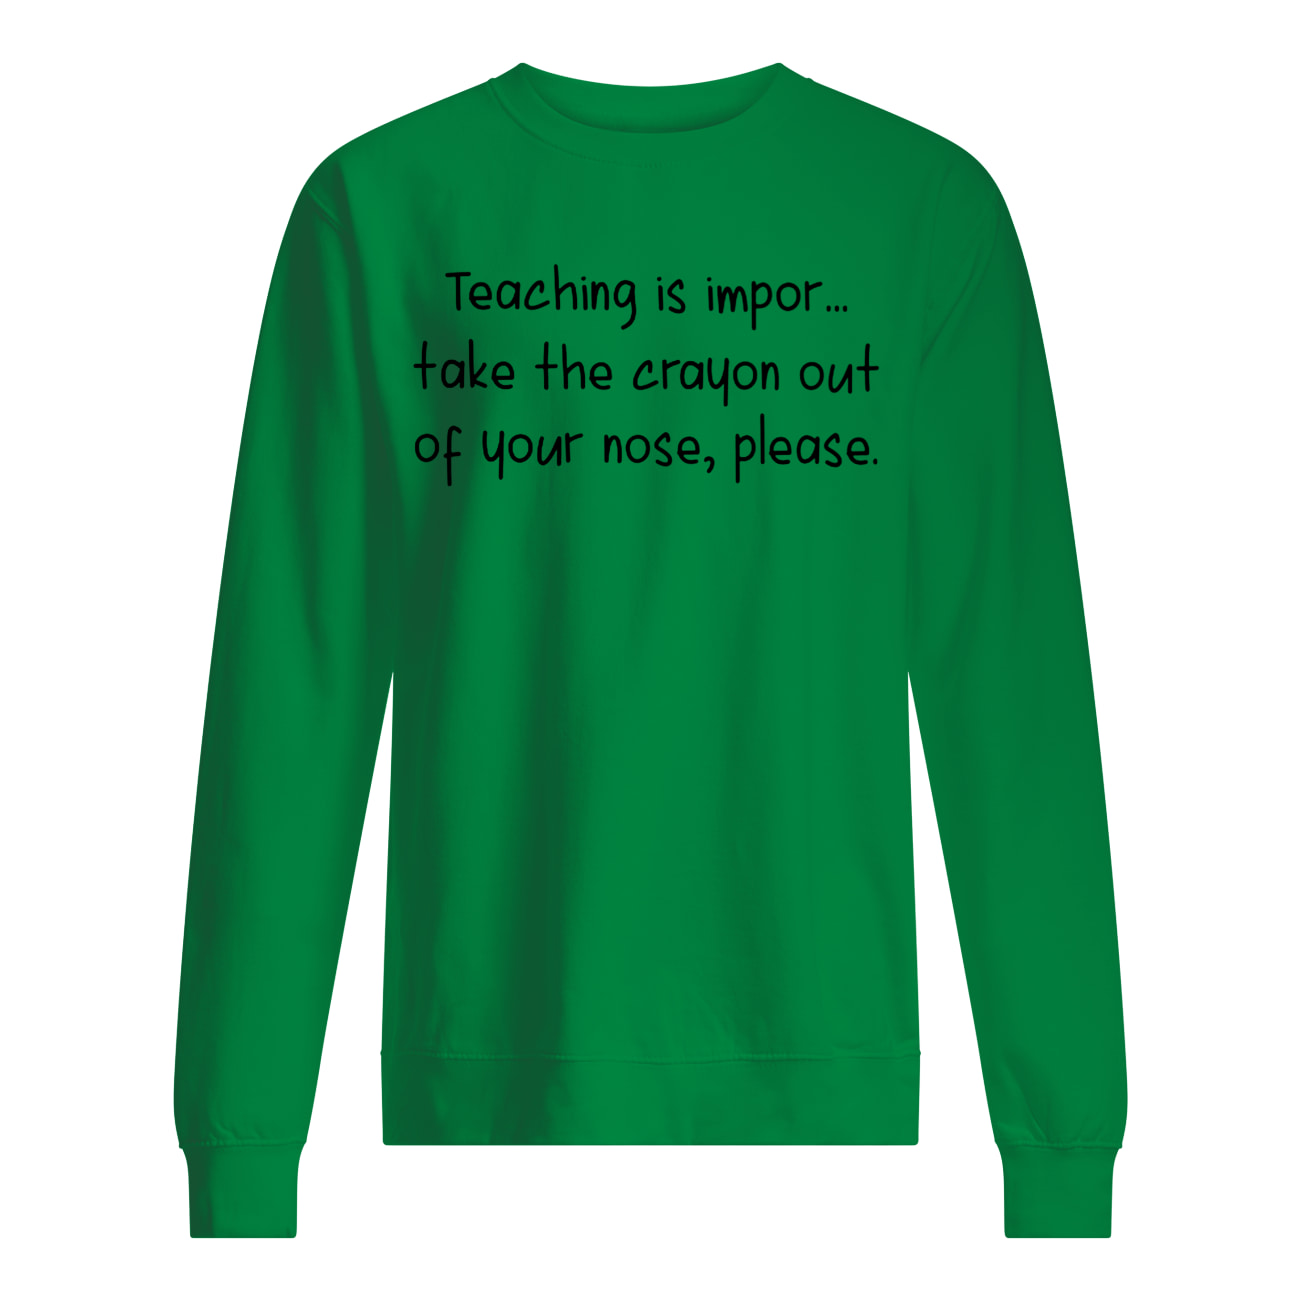 Teaching is impor take the crayon out of your nose please sweatshirt